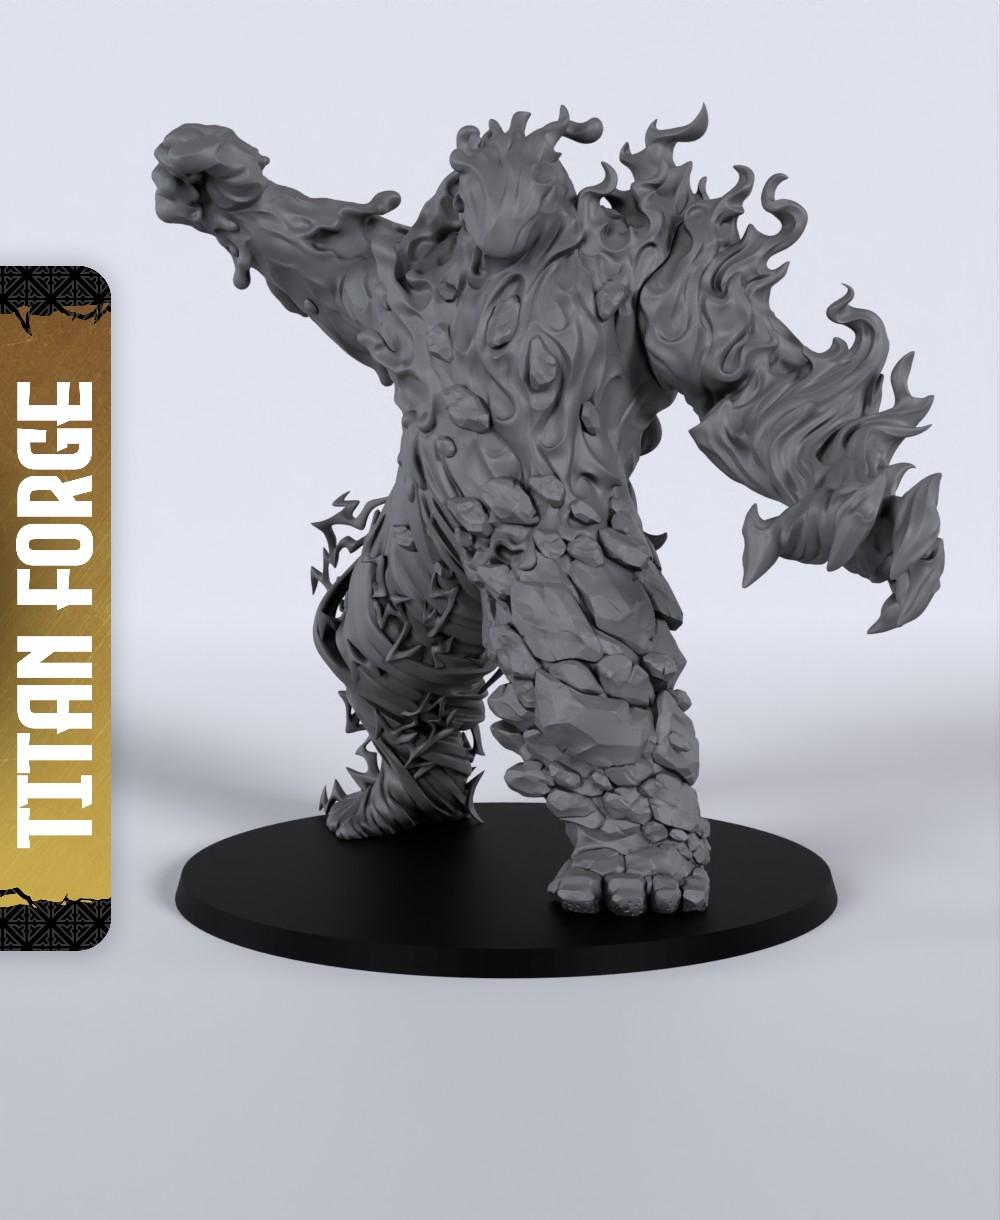 Elemental Golem - With Free Dragon Warhammer - 5e DnD Inspired for RPG and Wargamers 3d model